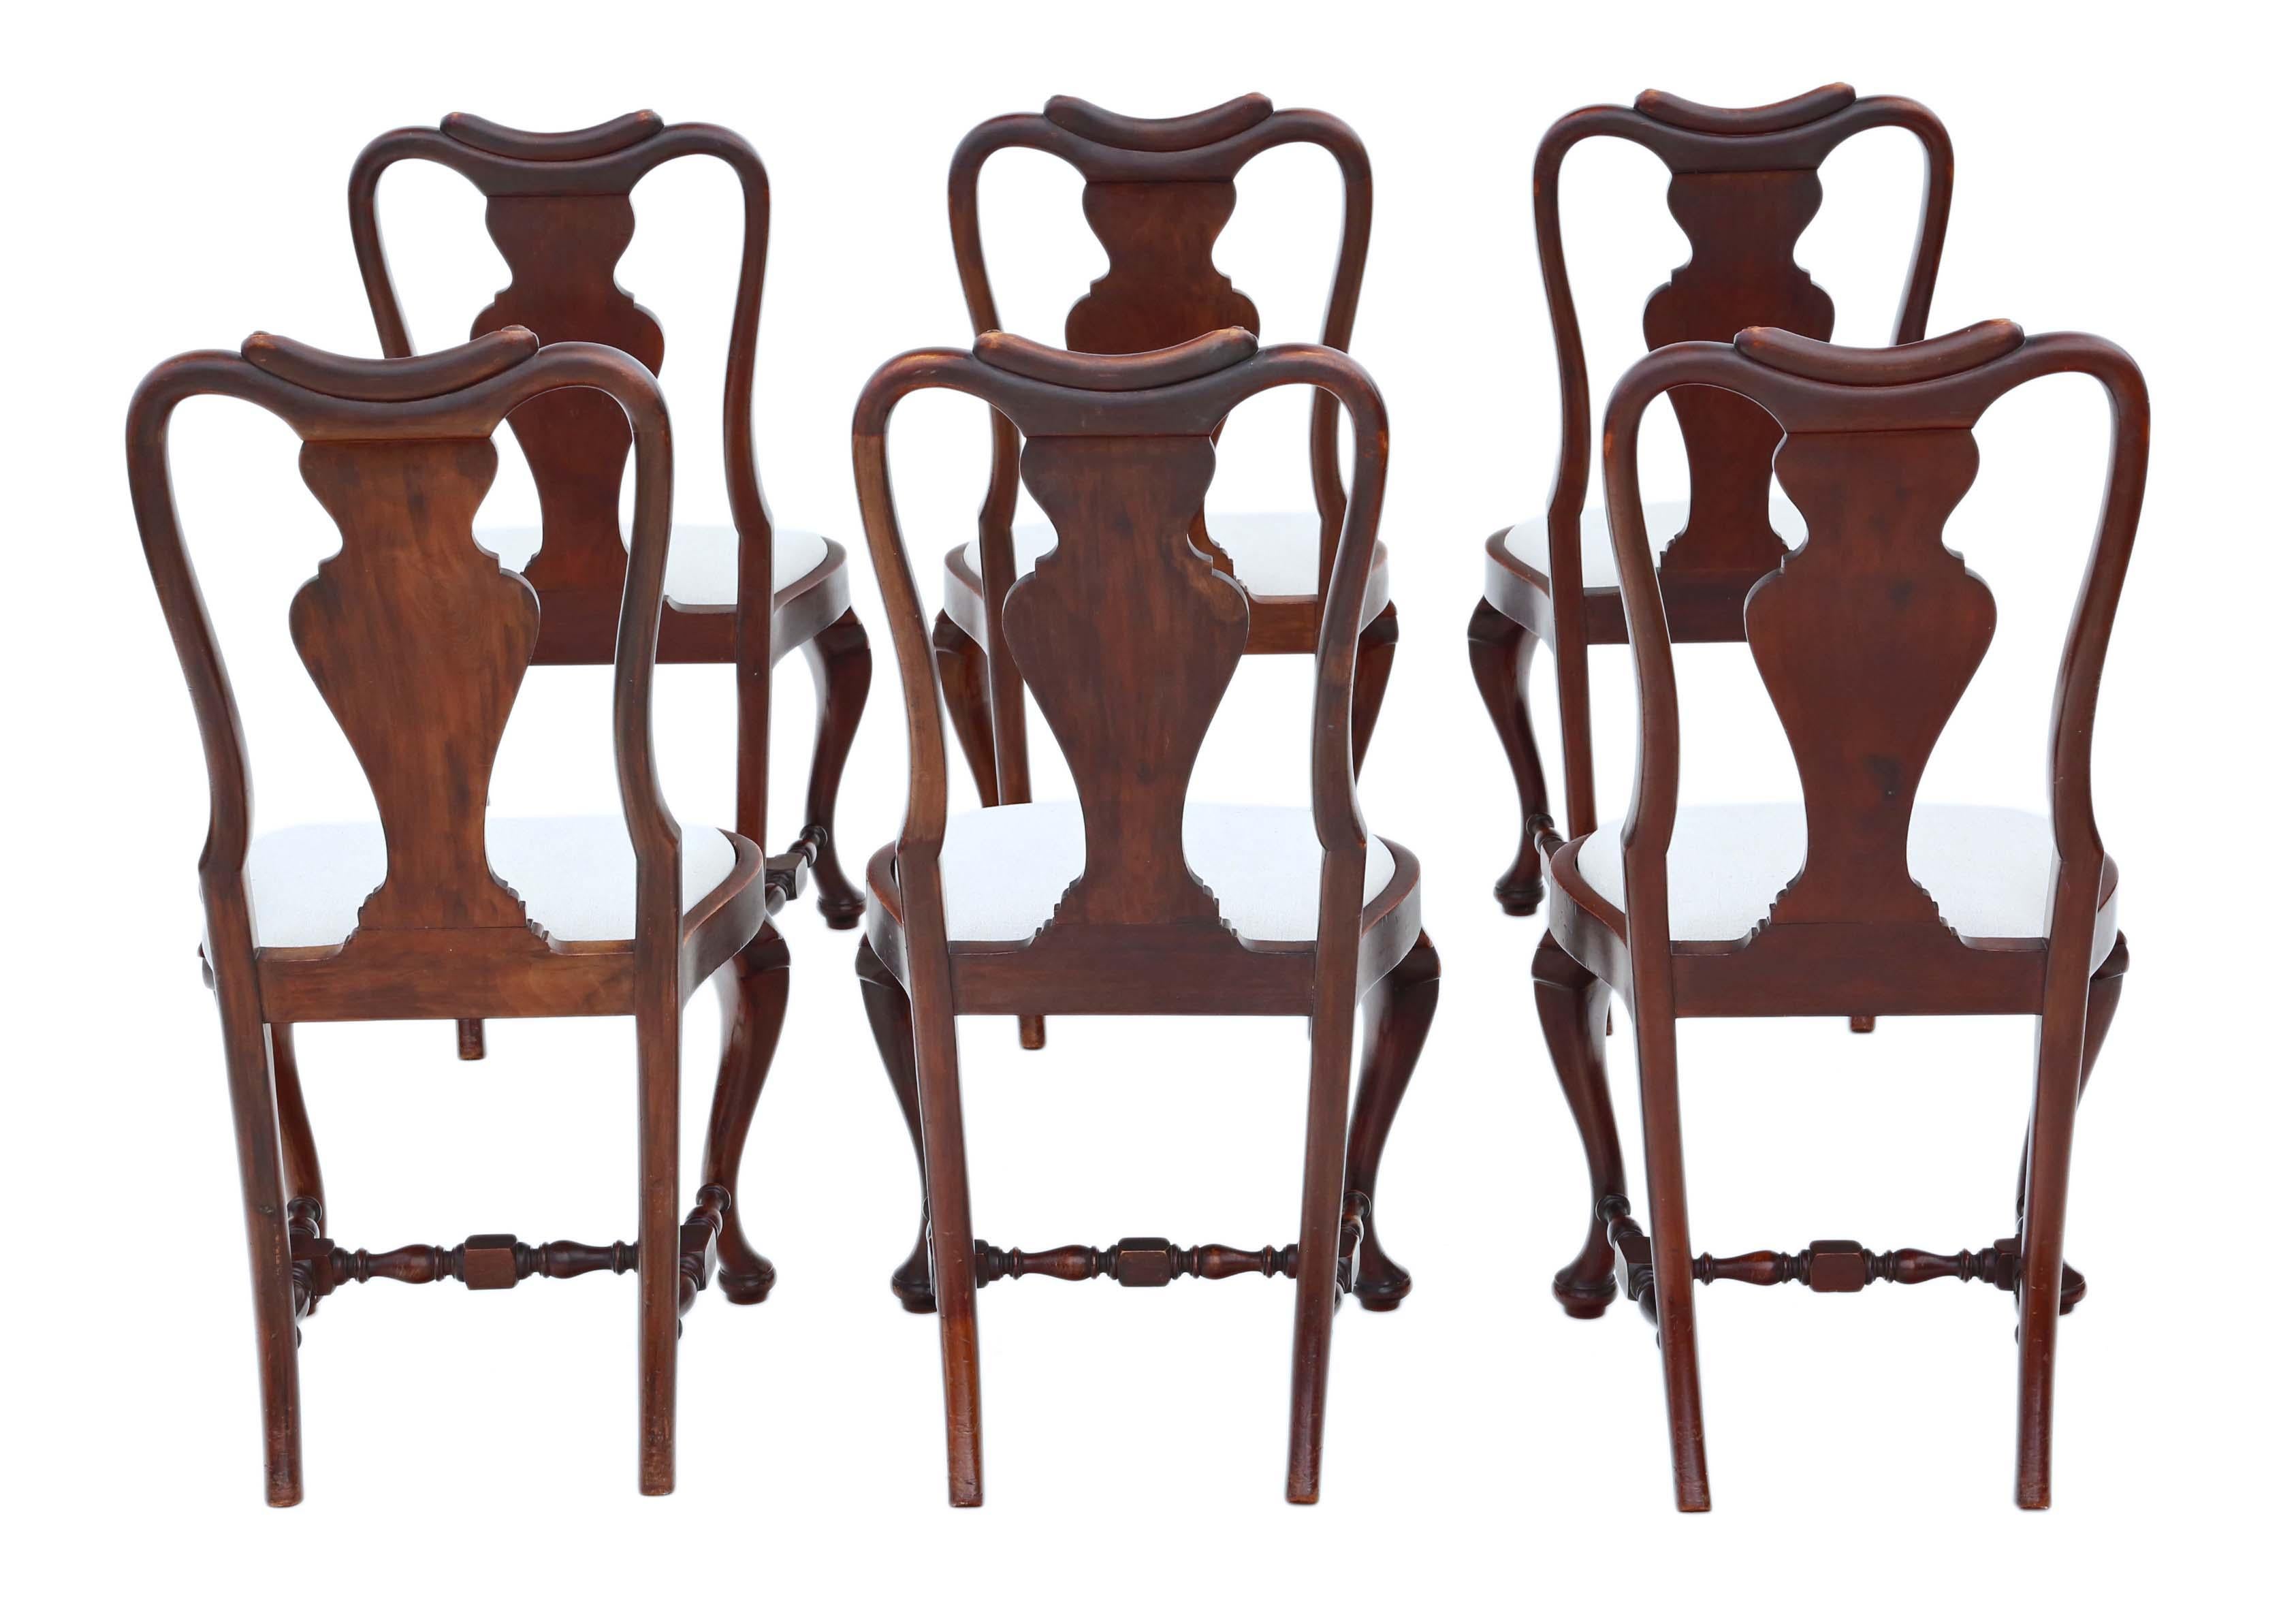 Antique fine quality set of 6 Queen Anne revival mahogany dining chairs C1900.

No loose joints or woodworm.

New professional upholstery. 

Overall maximum dimensions: 57cmW x 54cmD x 104cmH (50cmH seat when sat on)

Very good antique